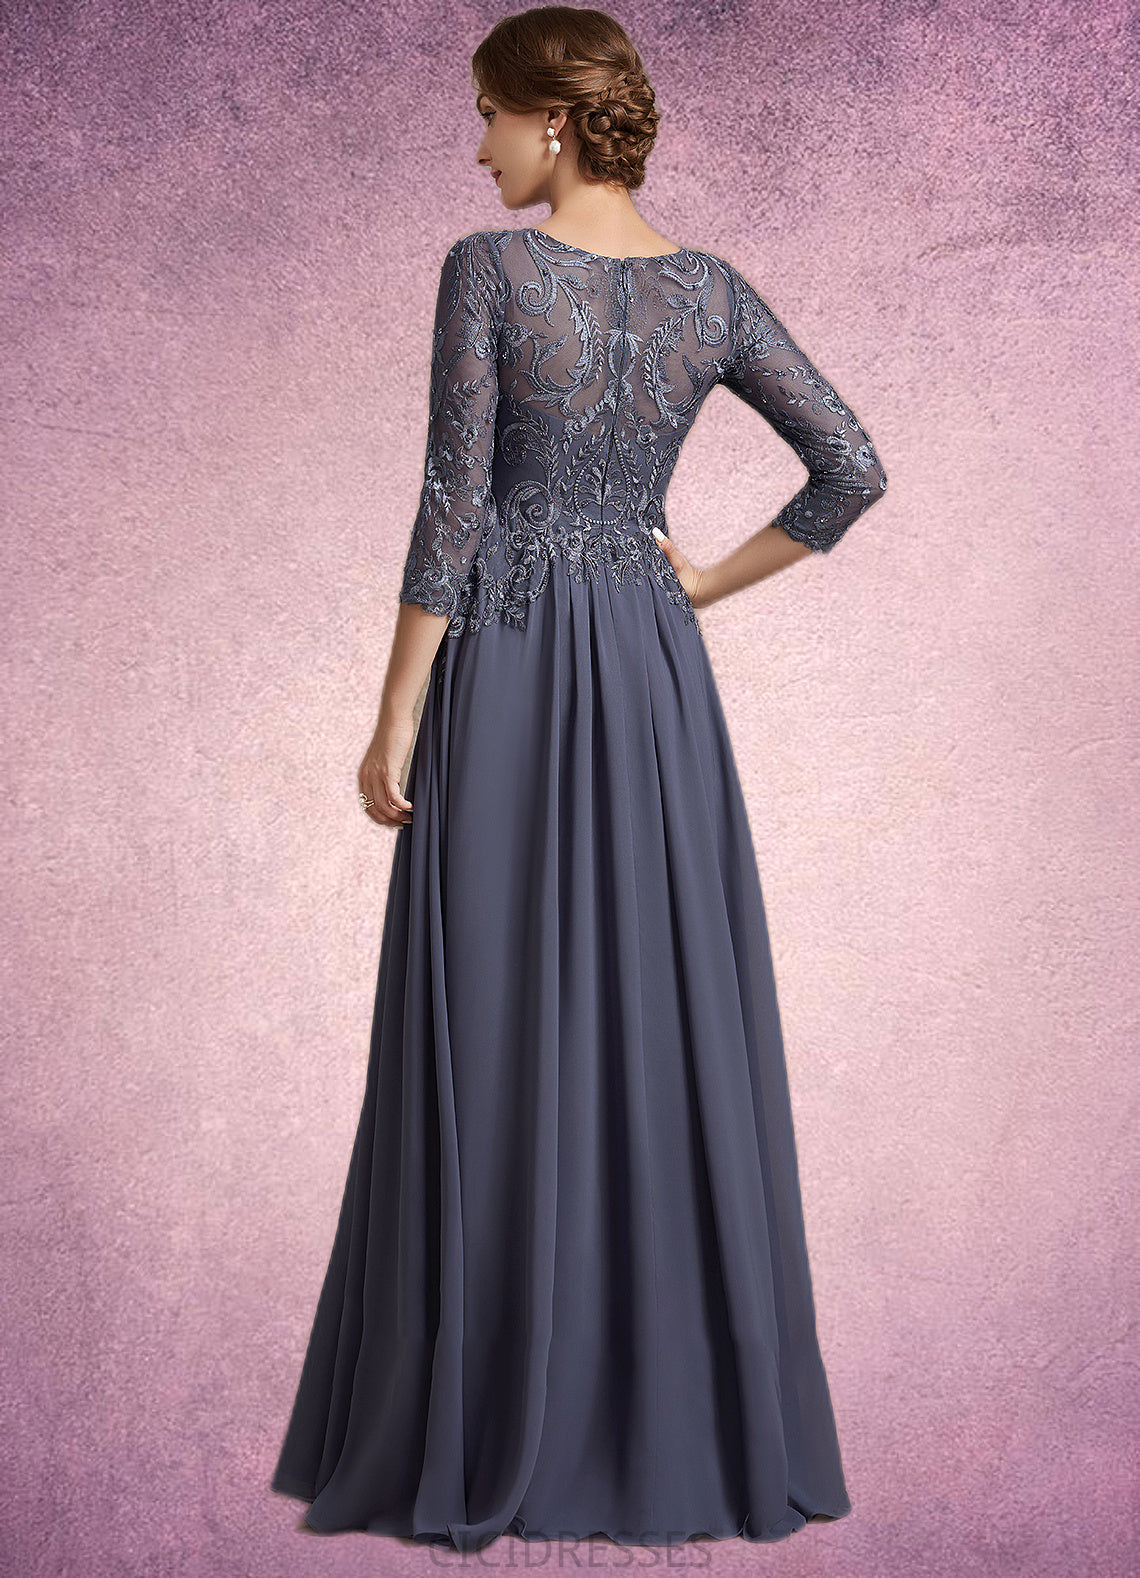 Anahi A-Line Scoop Neck Floor-Length Chiffon Lace Mother of the Bride Dress CIC8126P0014719